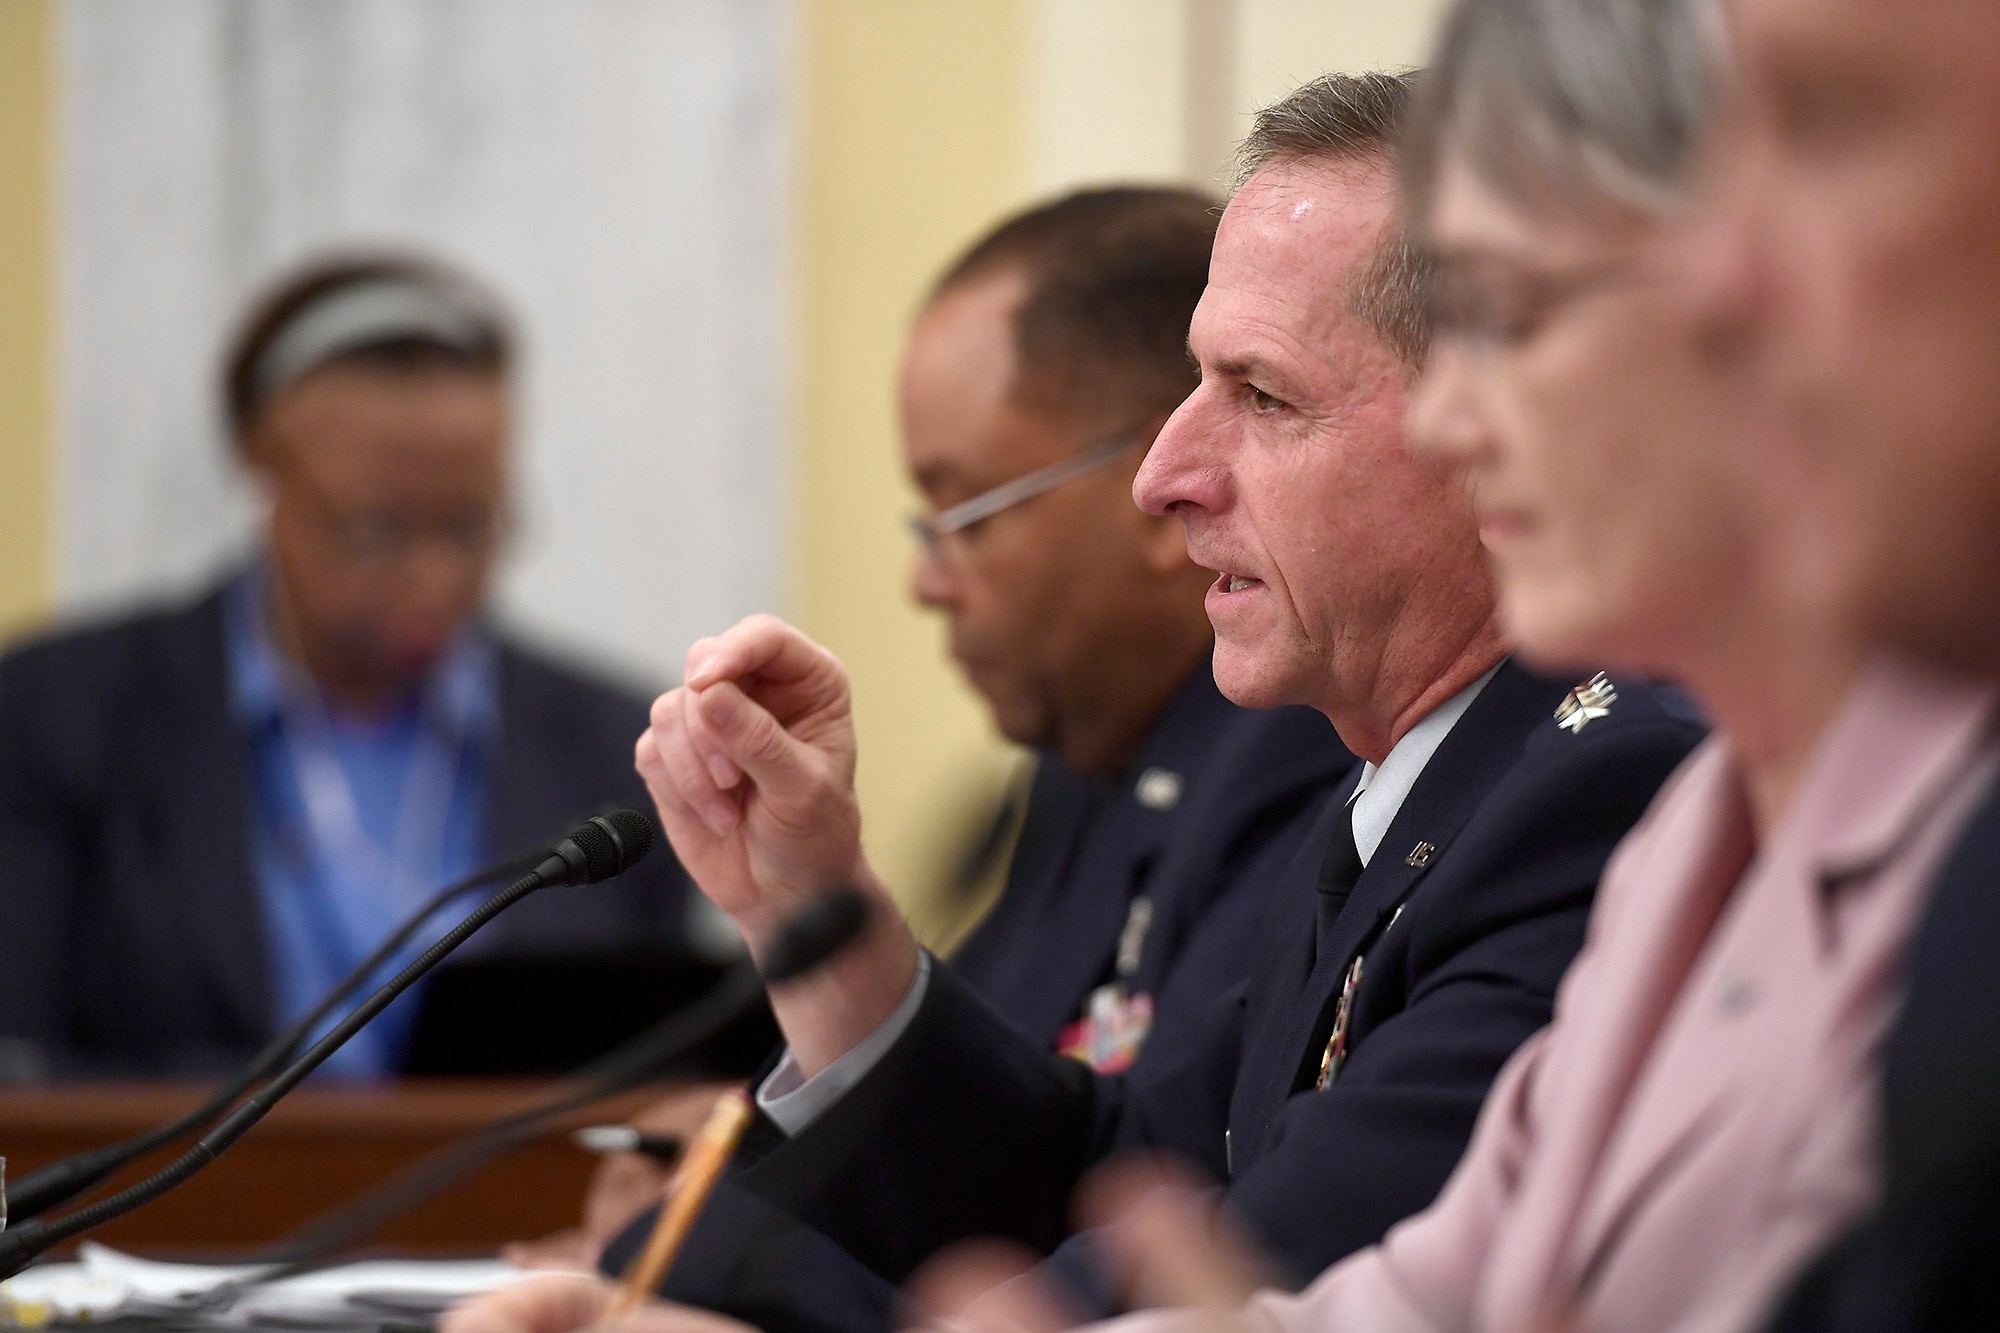 Air Force Chief of Staff Gen. David Goldfein and Secretary of the Air Force Heather Wilson testify before the Senate Armed Services Subcommittee on Strategic Forces May 17, 2017, in Washington, D.C. With Wilson and Goldfein were Lt. Gen. Samuel Greaves, the Space and Missile Systems Center commander; Gen. John Raymond, the Air Force Space Command commander and Cristina Chapin, the General Accounting Office director of acquisition and sourcing management. The committee examined military space organization, policy, and programs. (U.S. Air Force photo/Scott M. Ash)